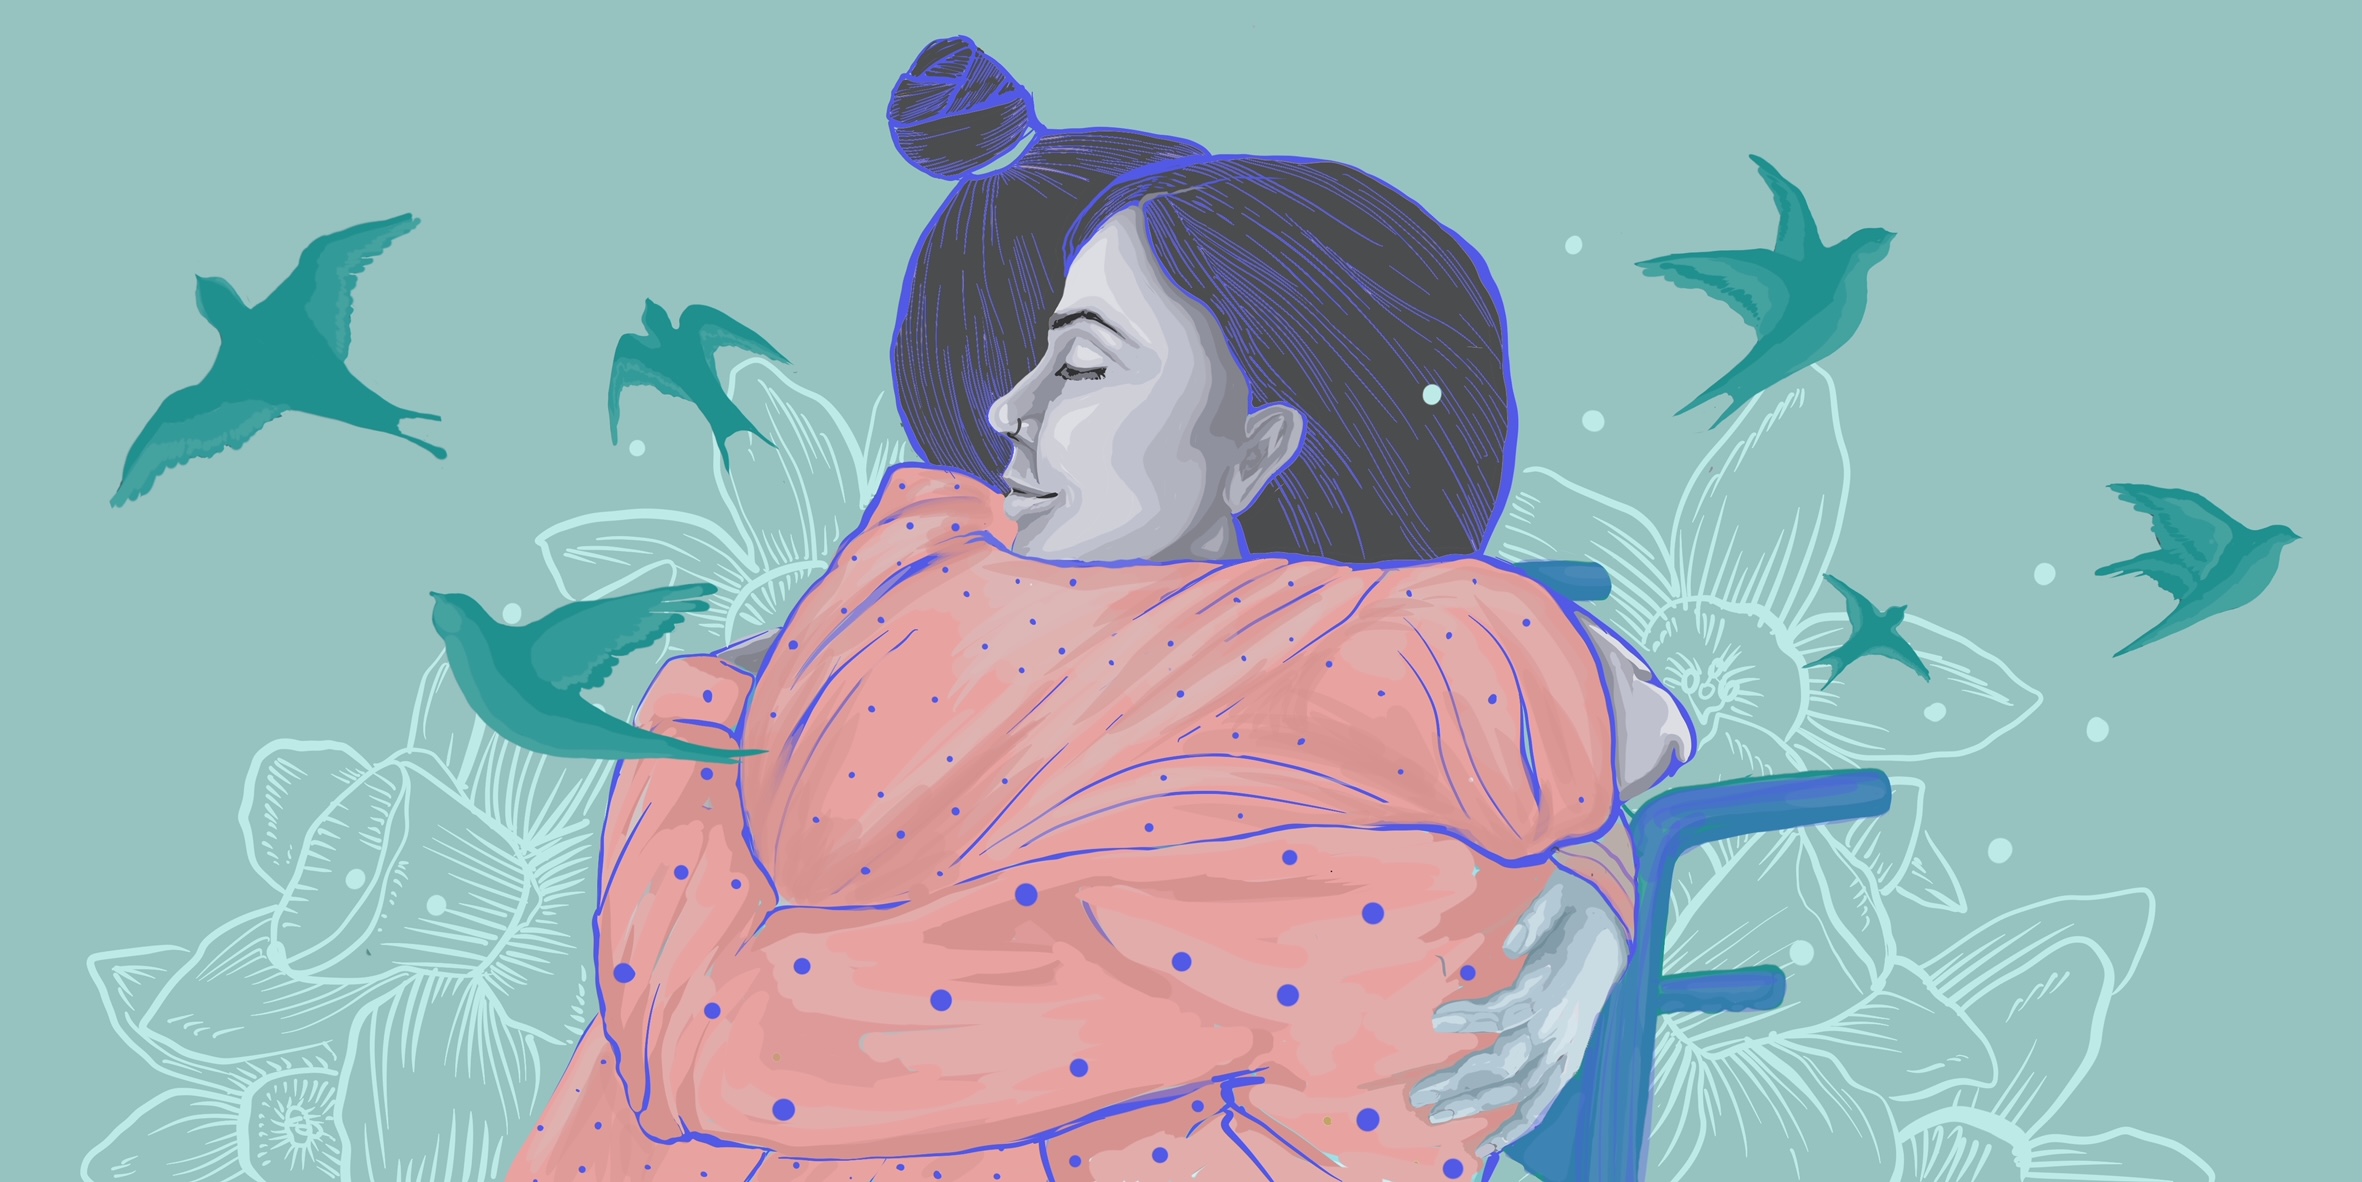 An artistic mural is pictured. In it, two women are pictured hugging each other. The woman on the right is seated in a wheelchair. Both women are wearing sweaters with varying sized of polka dots, which are blue. The sweaters are coral colored. The background is turquoise and birds are seen flying left and right.